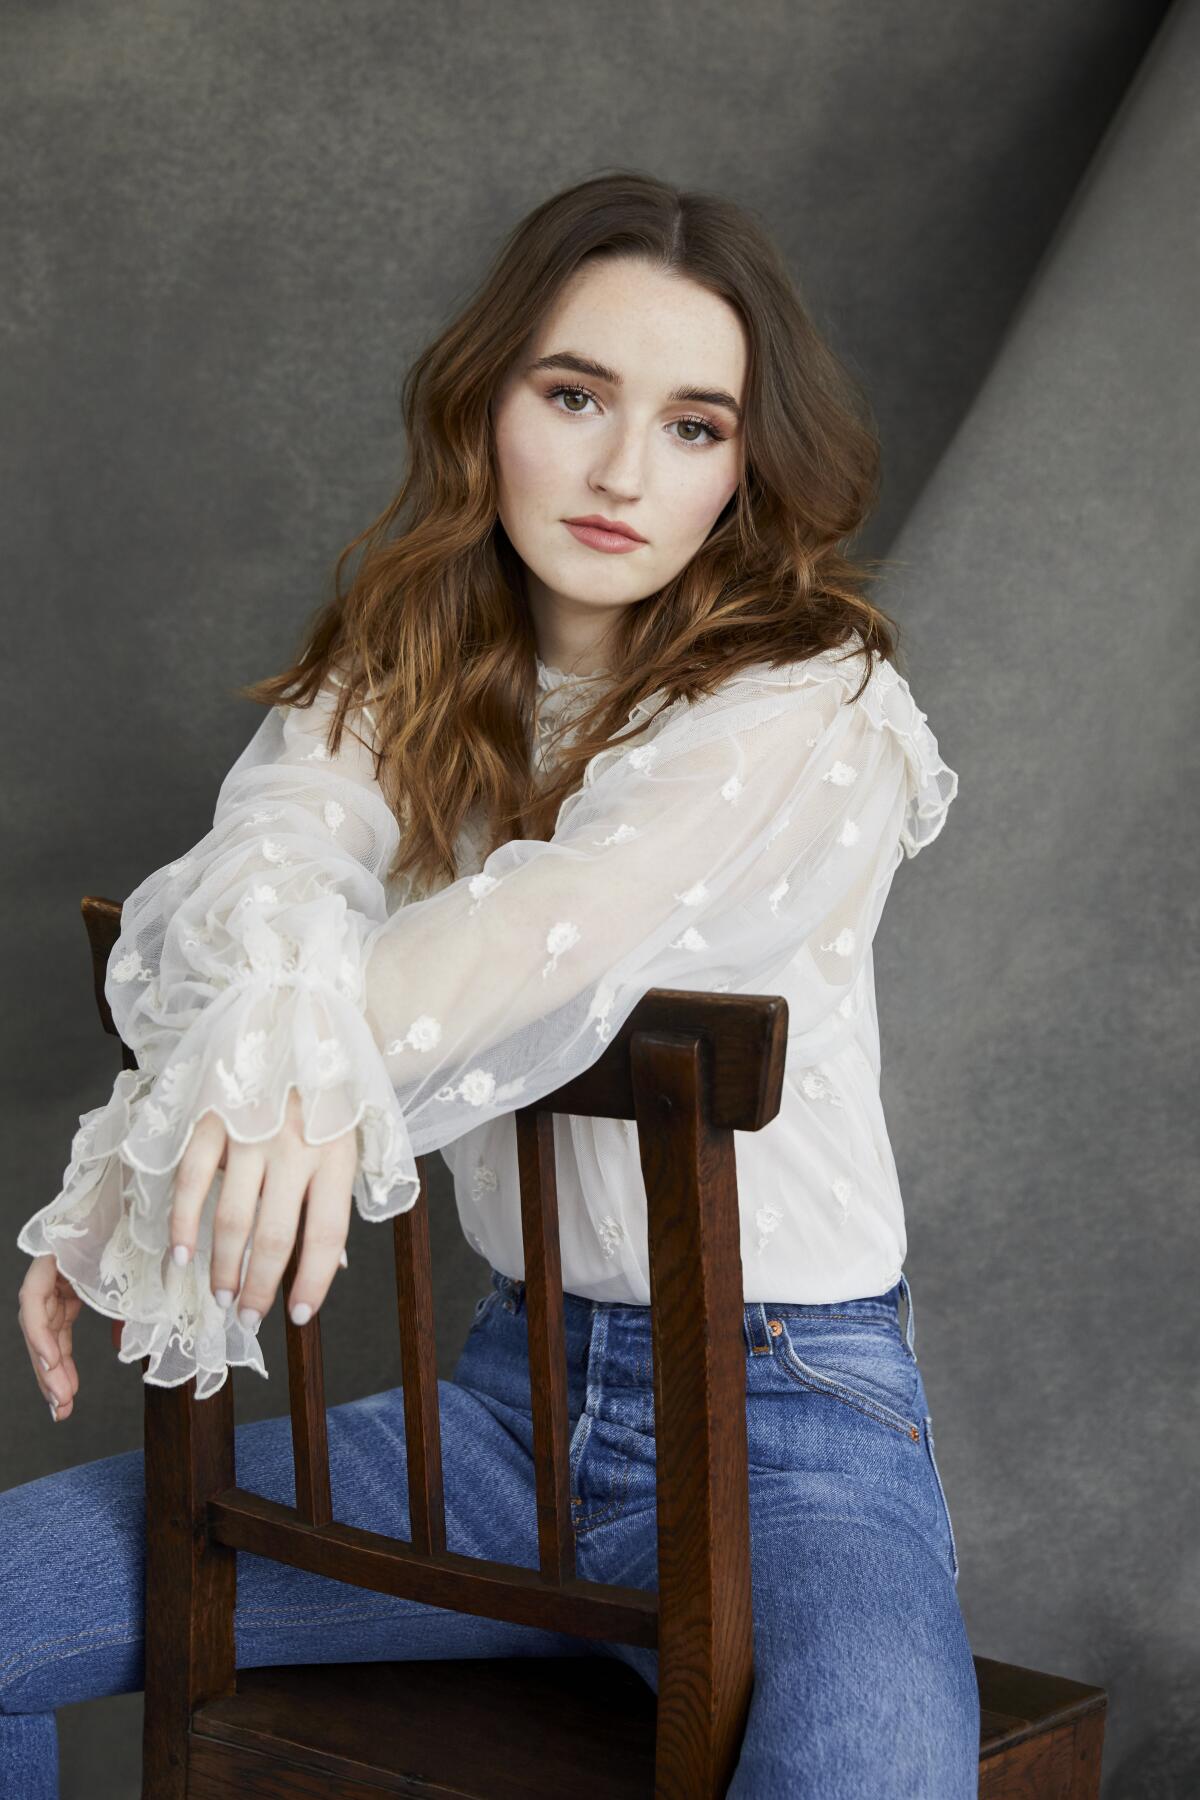 Since her portrayal of a rape victim, Kaitlyn Dever says, “People have reached out to me in so many ways." 